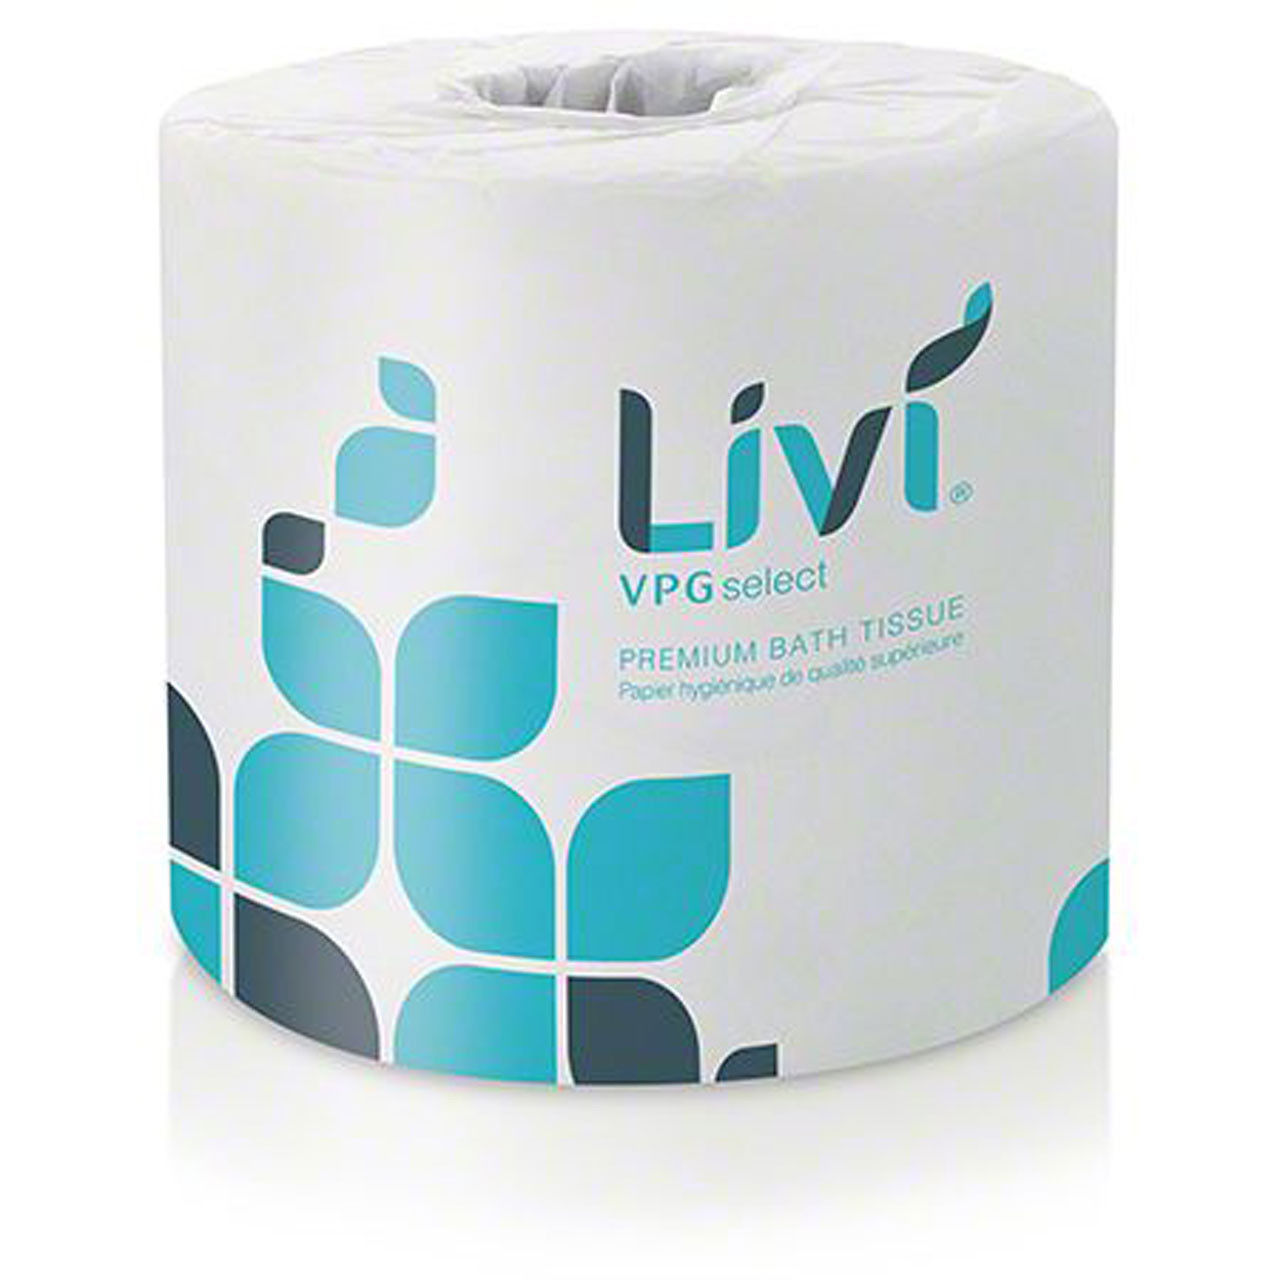 How many rolls are there per carton of the Solaris Paper Livi VPG Select Toilet Tissue 2/ply?